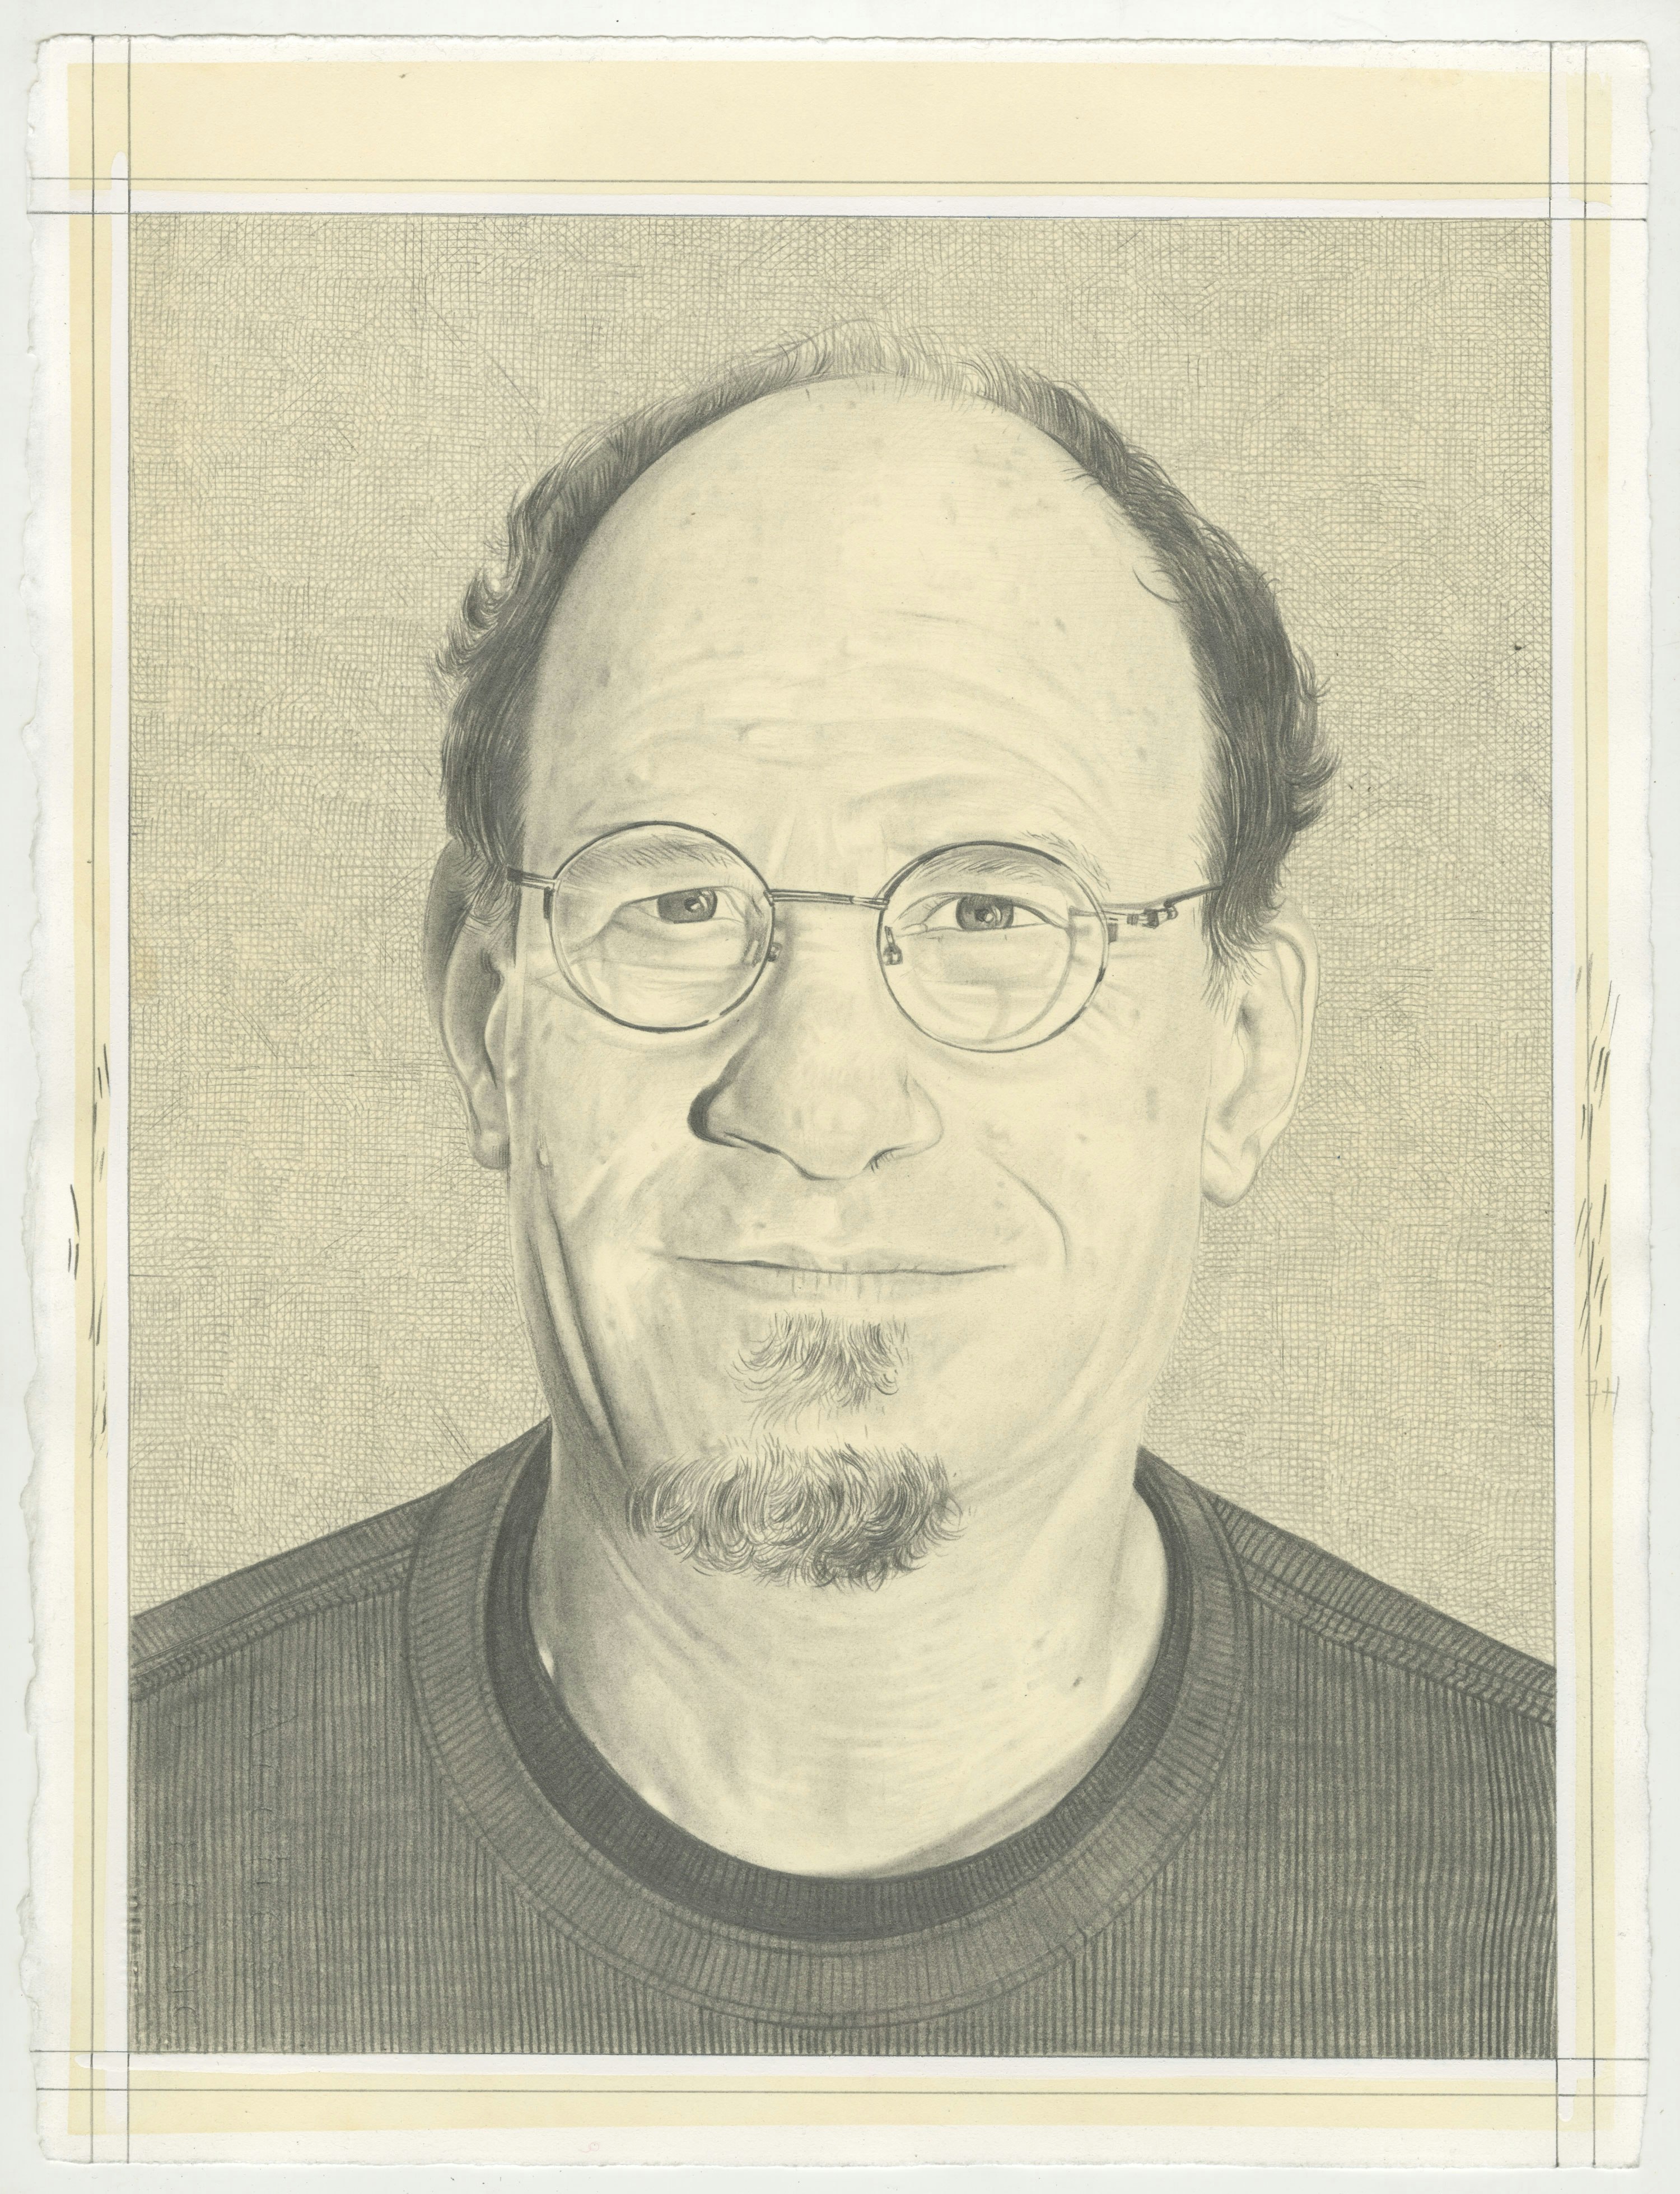 Portrait of Mark Bloch, pencil on paper by Phong H. Bui.